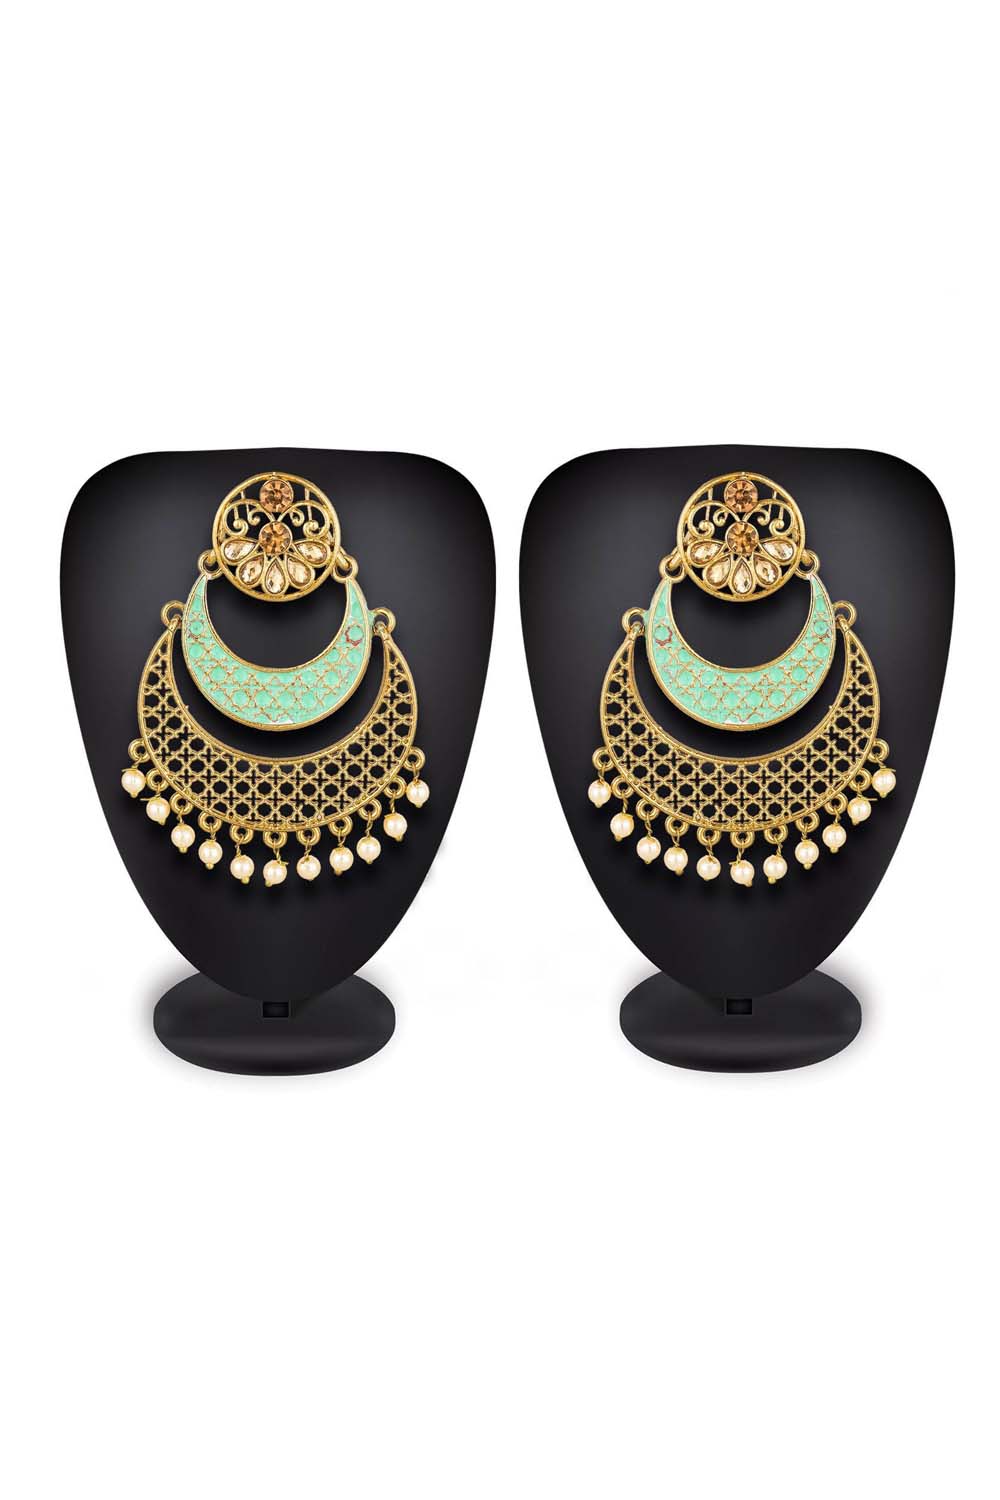 Buy Alloy Earring For Women's At KarmaPlace